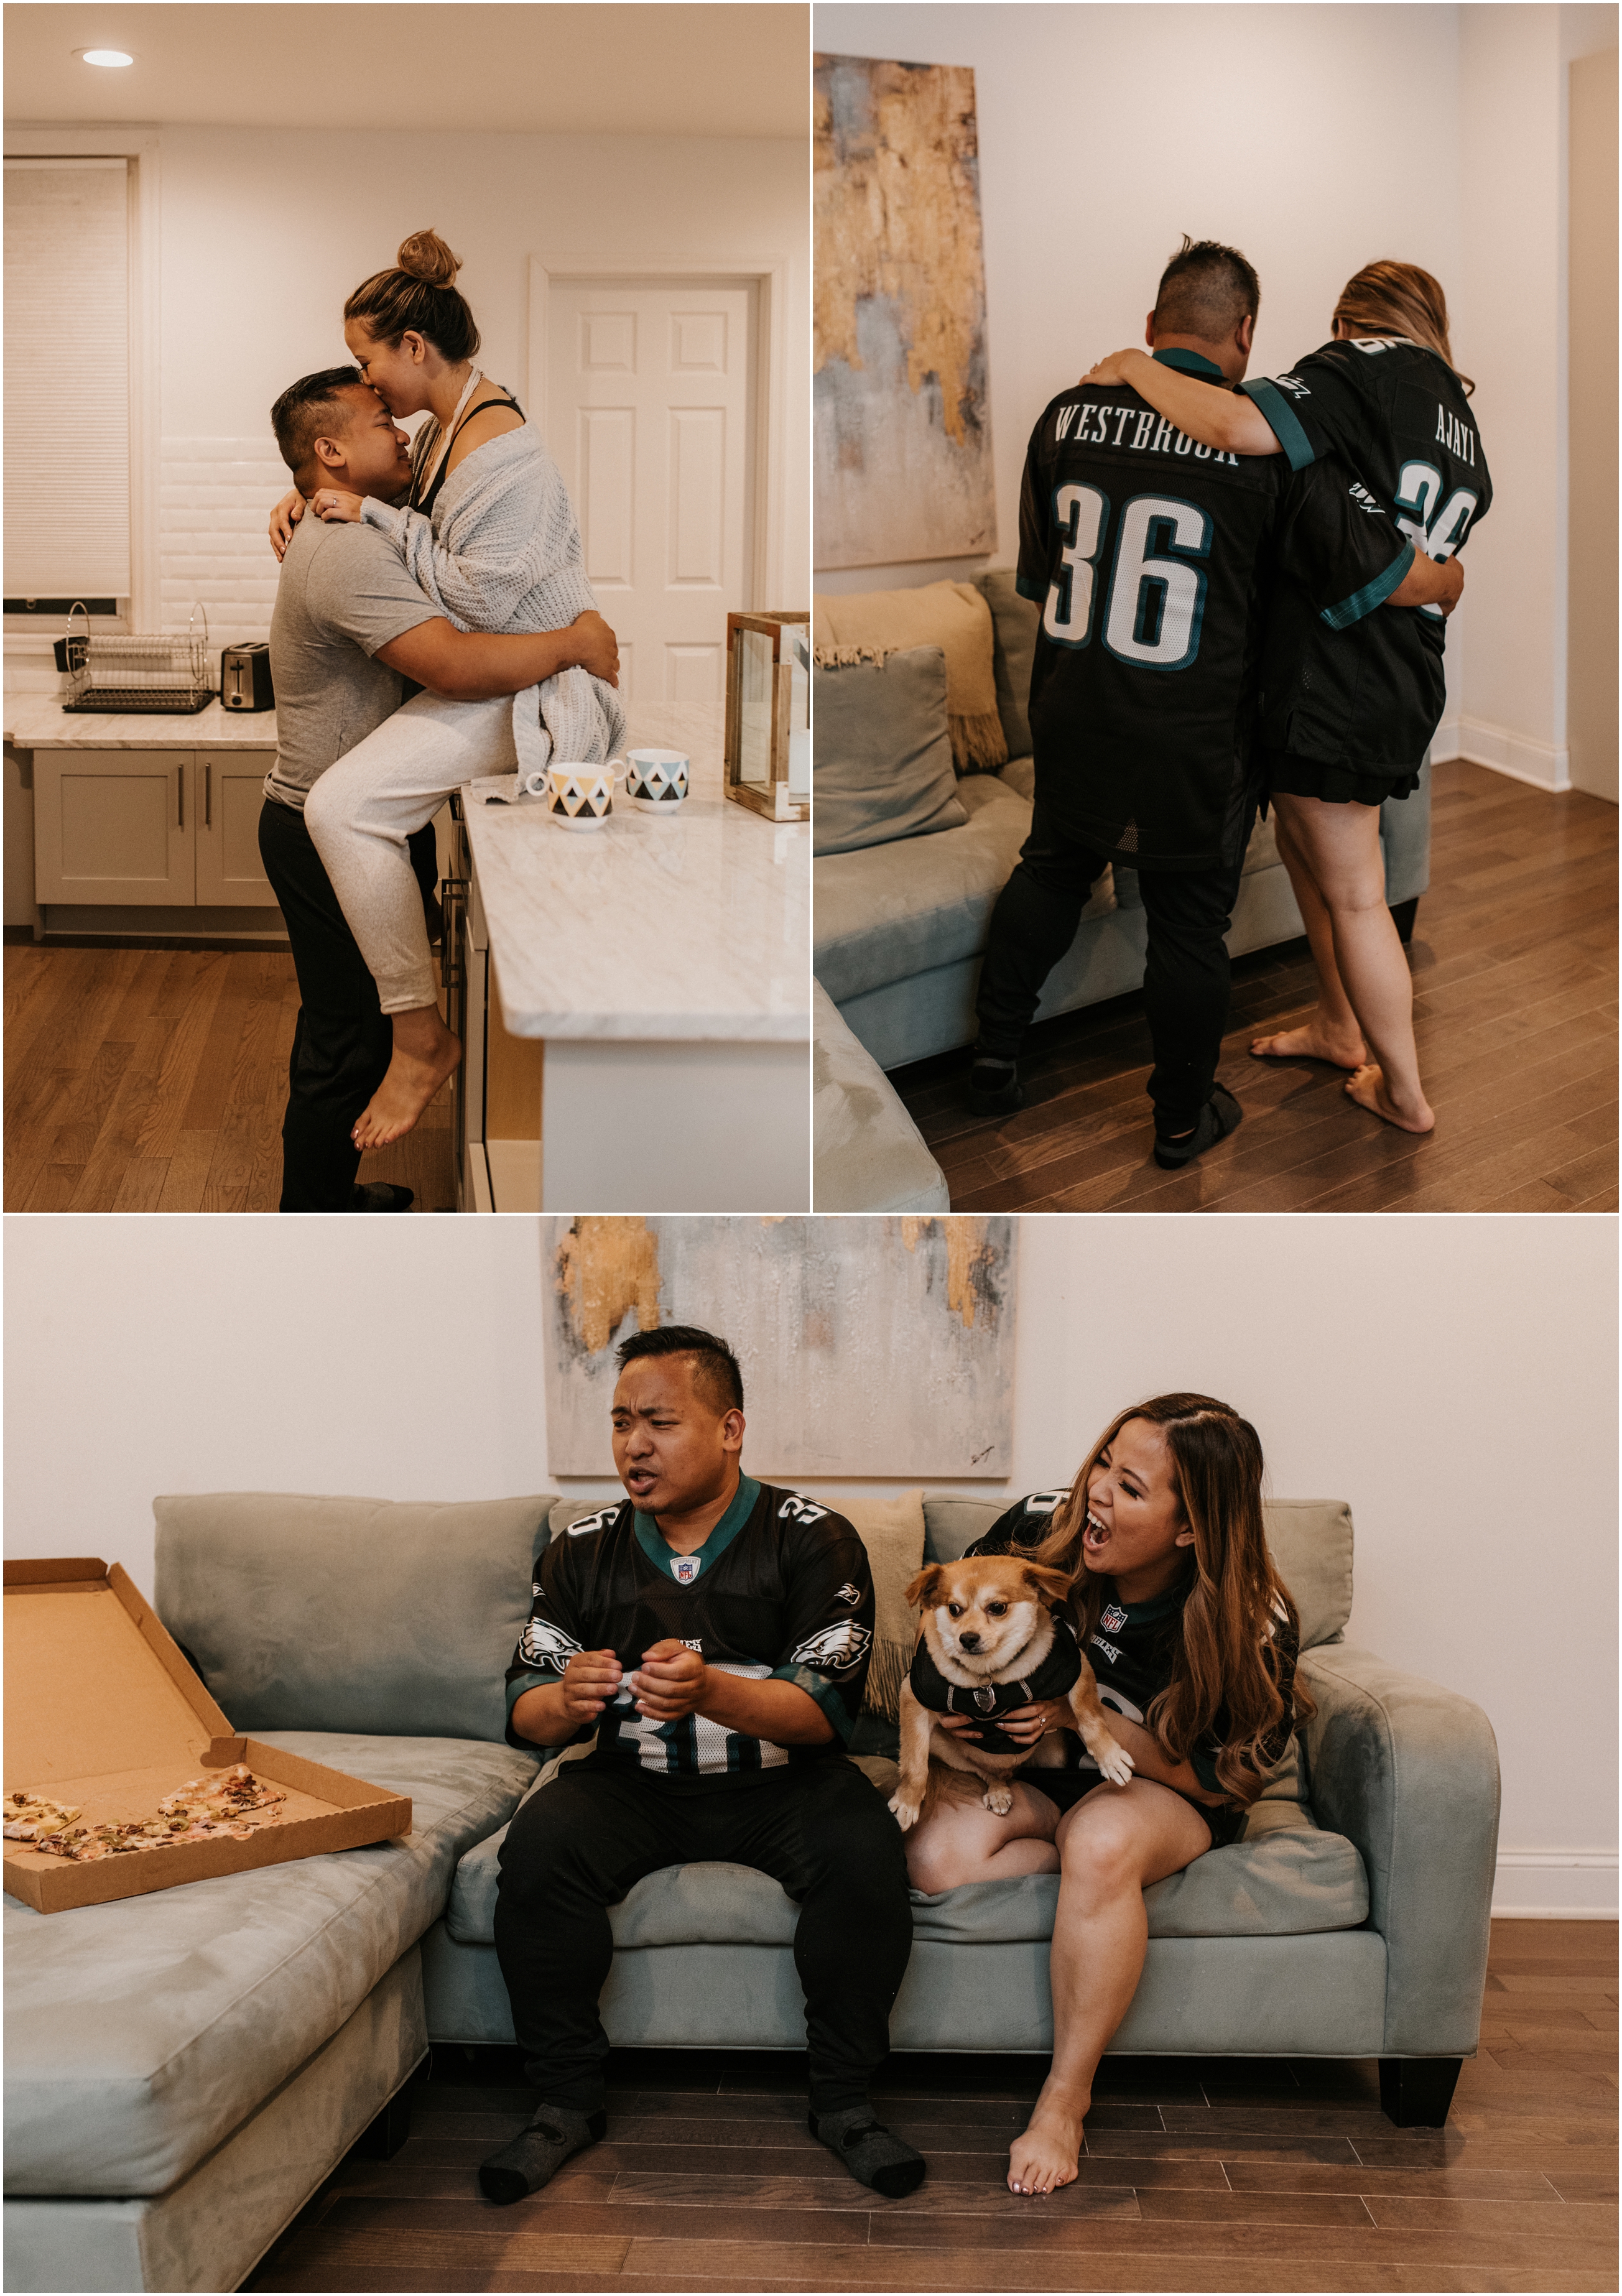 couple wearing eagles jerseys and eating pizza on couch